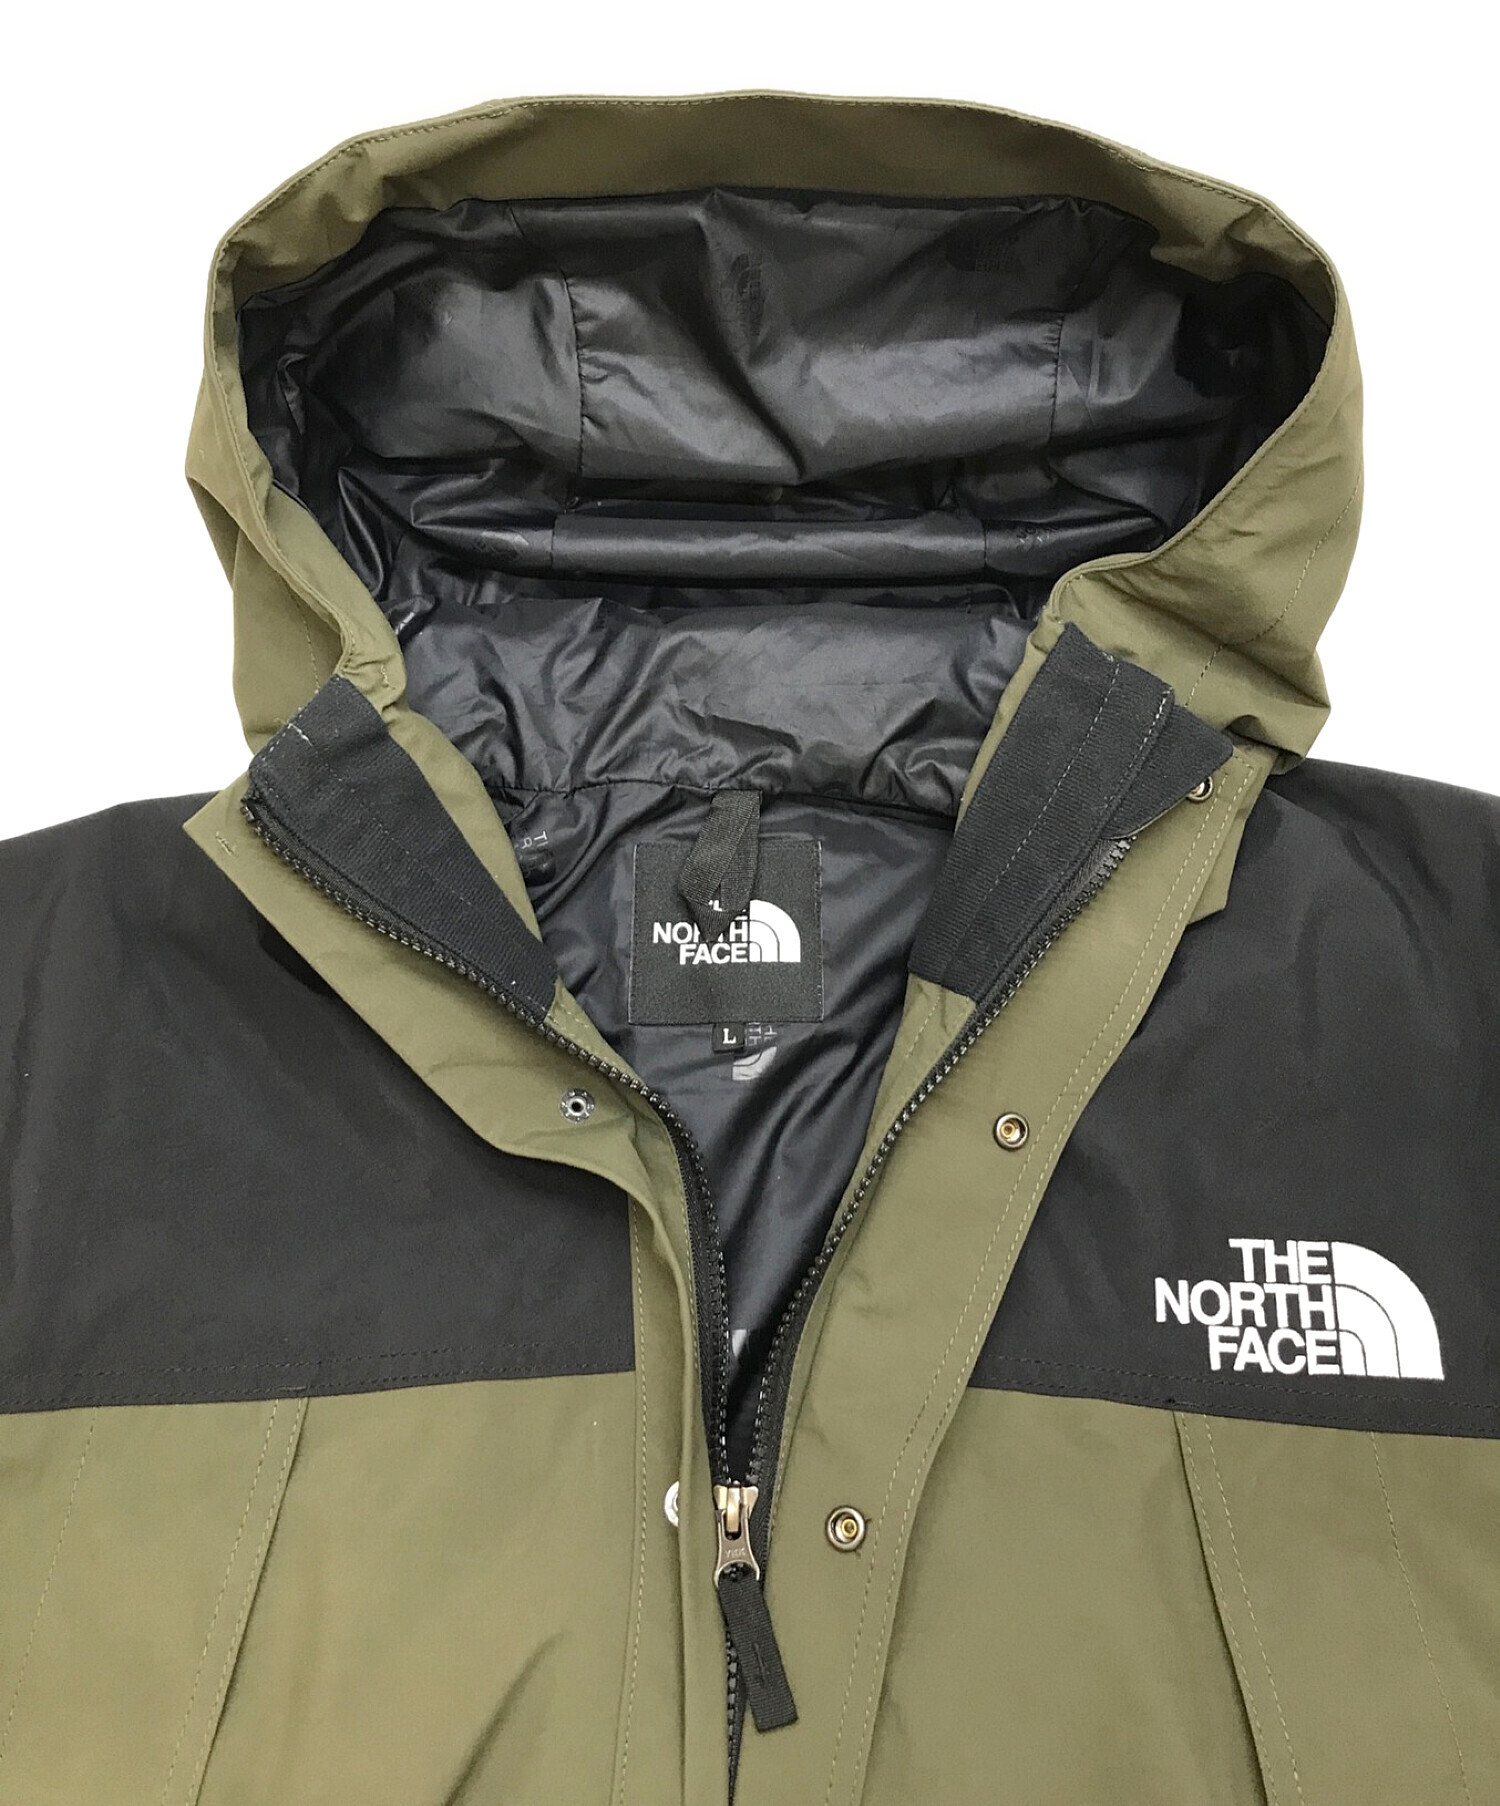 THE NORTH FACE◇BALTRO LIGHT JACKET バルトロライトジャケット/S